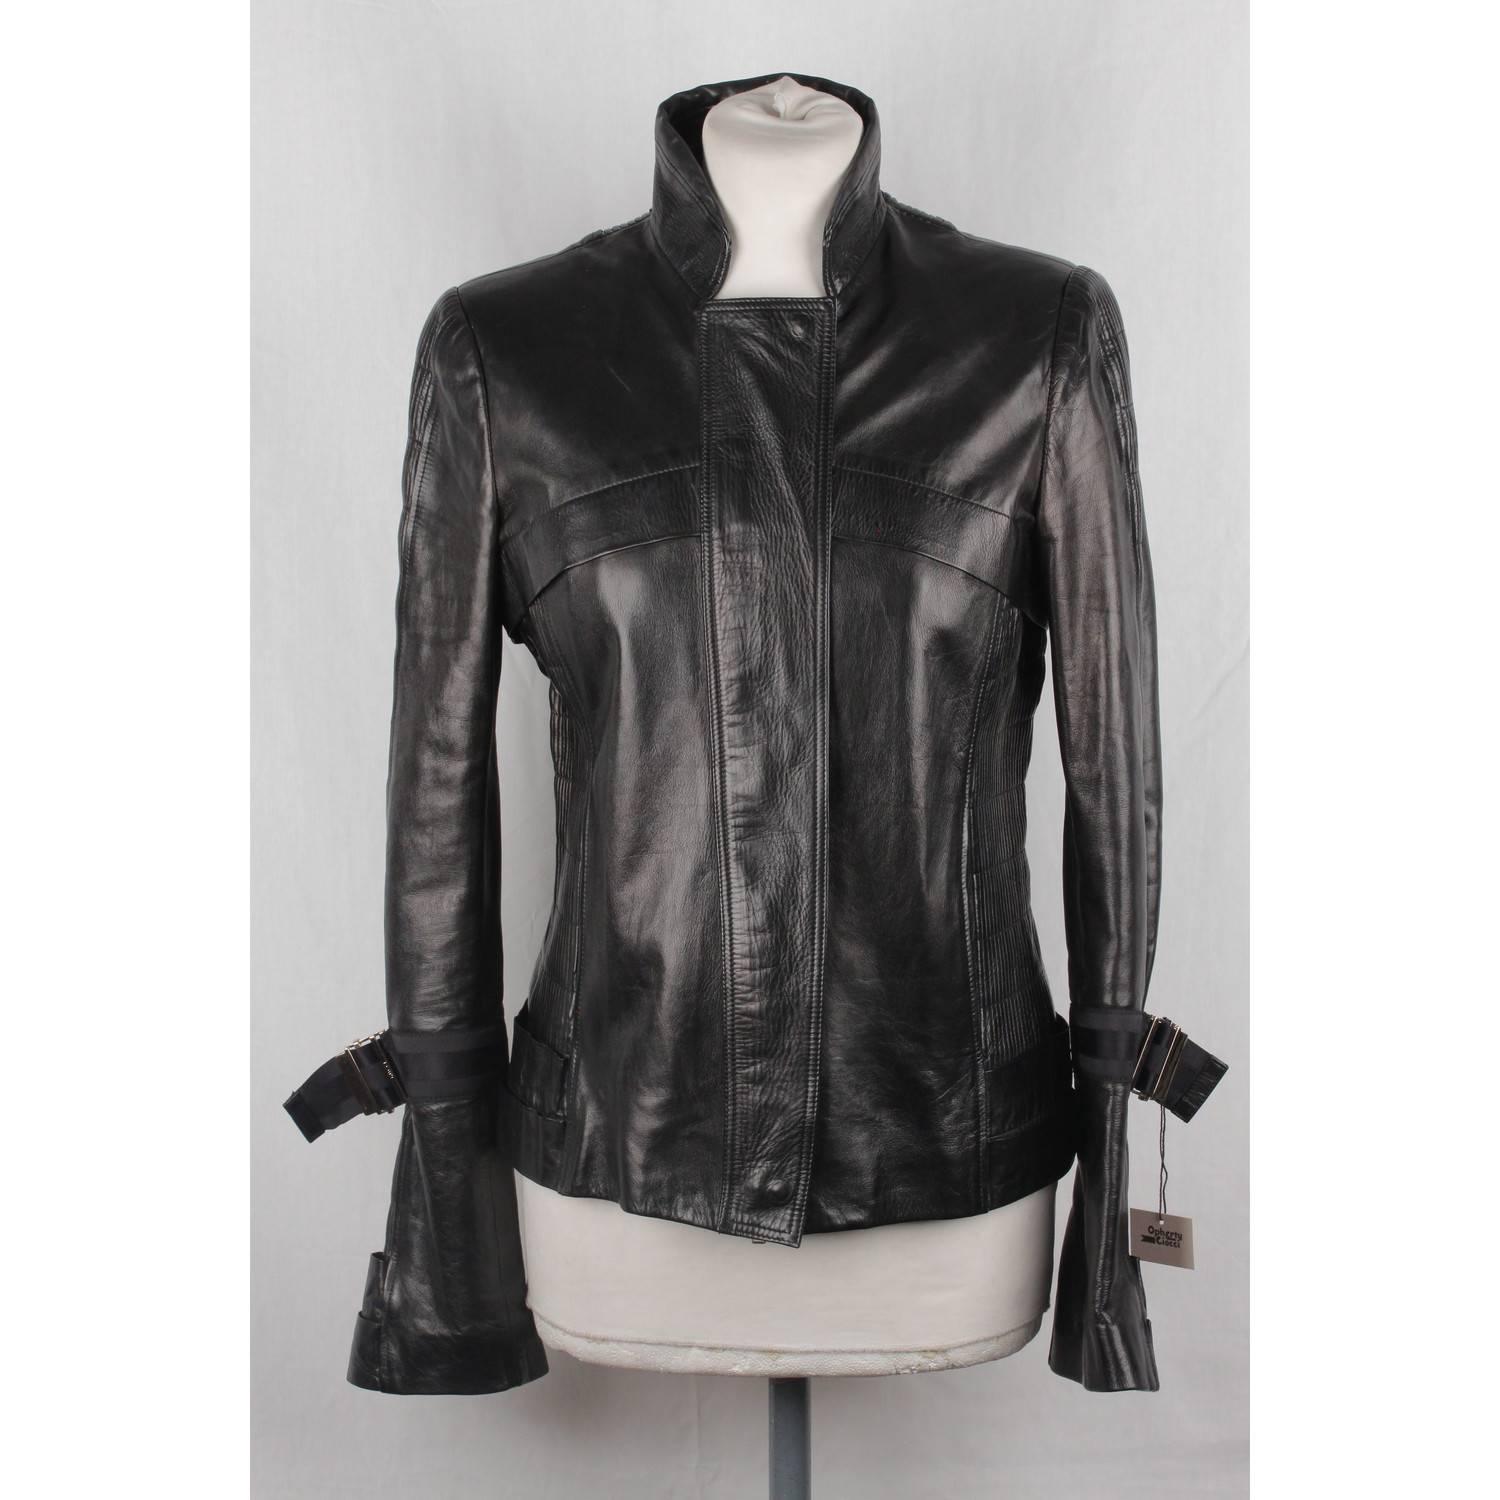 Women's GUCCI Black Leather BIKER JACKET with Pintucked Panels